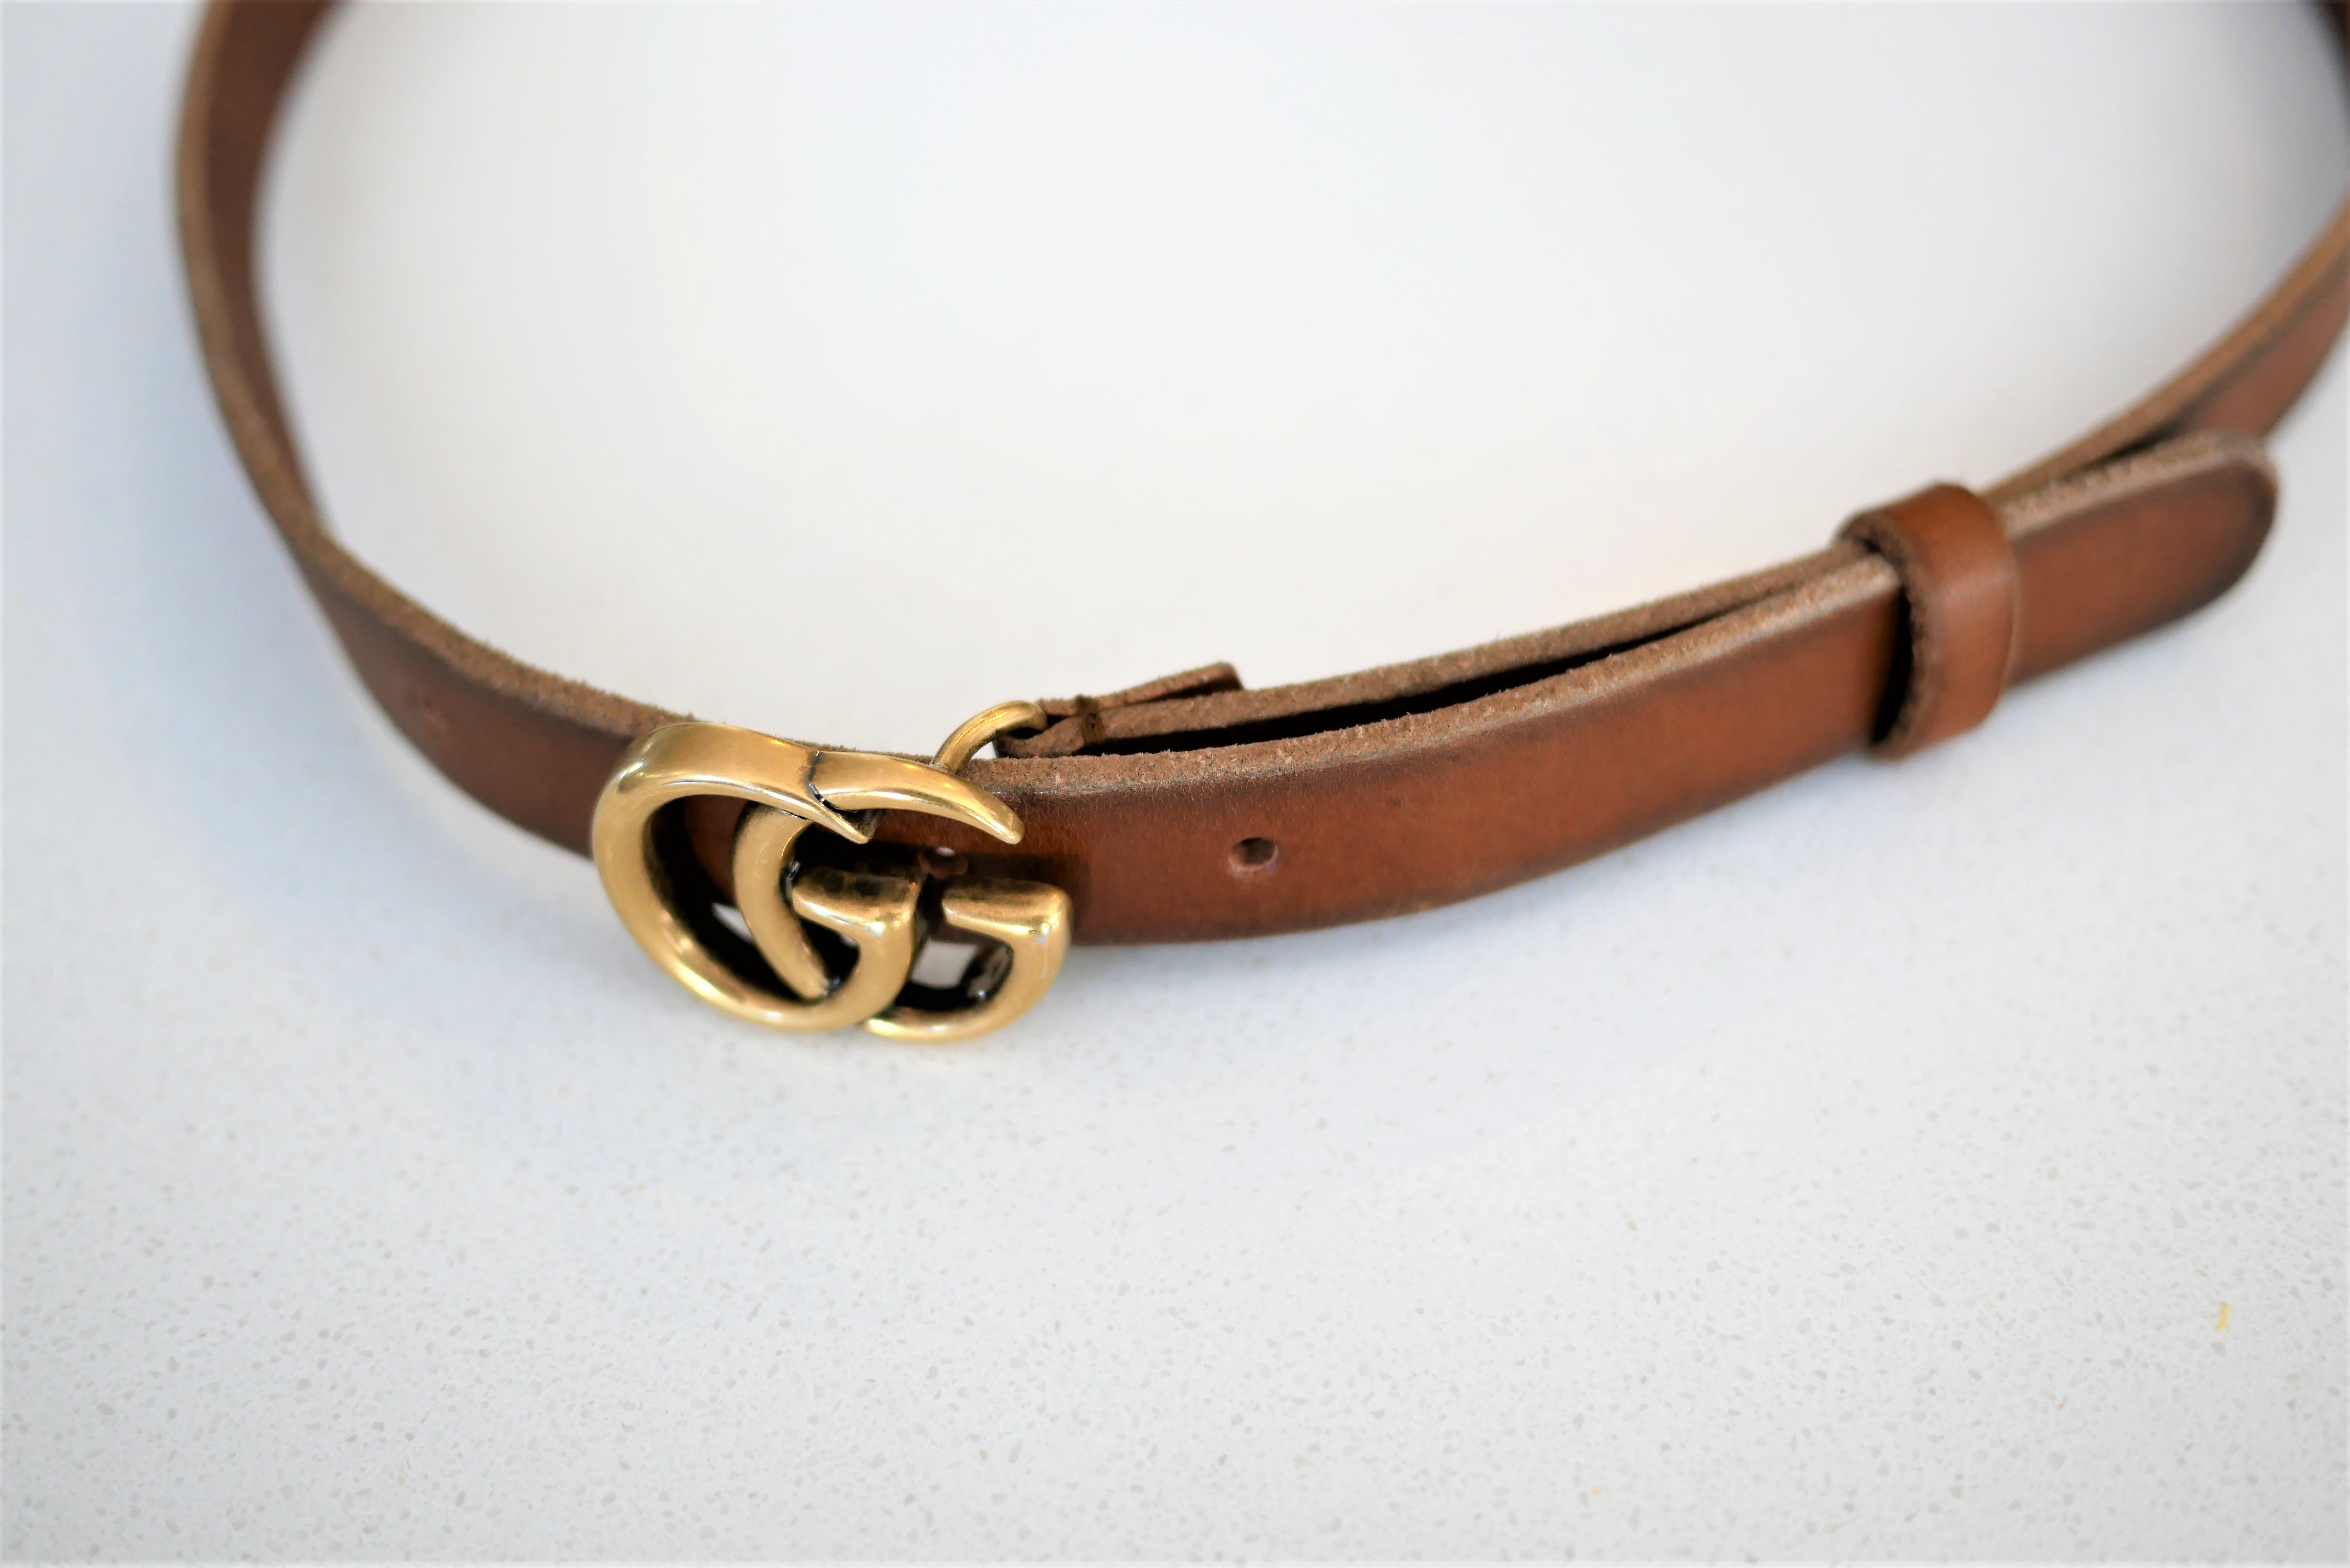 Gucci Marmont belt review/how to 